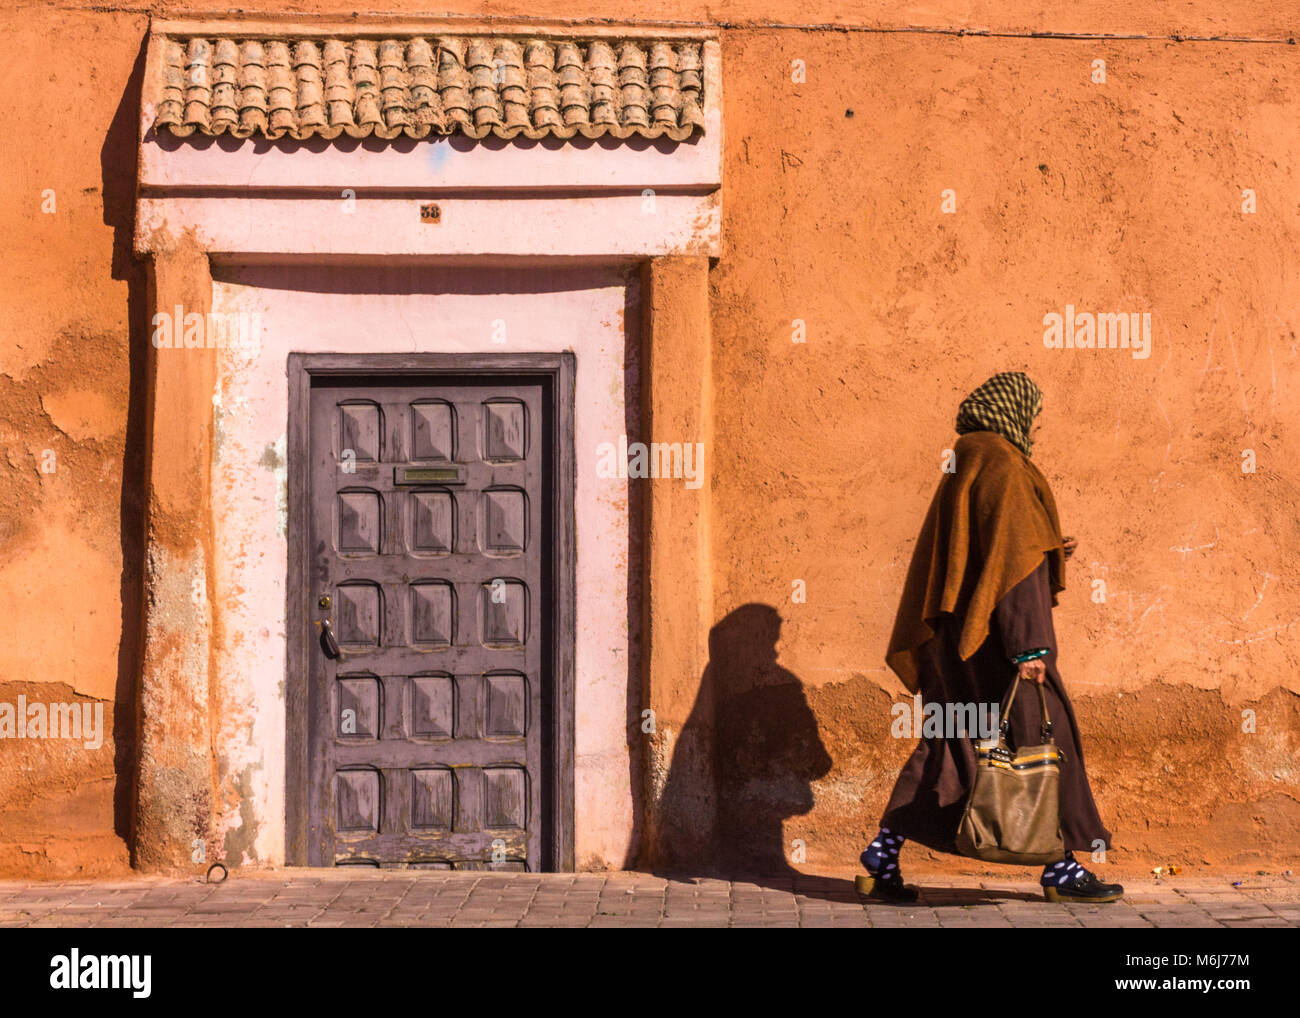 A local woman walks past a low doorway set into ancient walls of the Medina, Marrakesh. Her shadow is cast on the wall Stock Photo